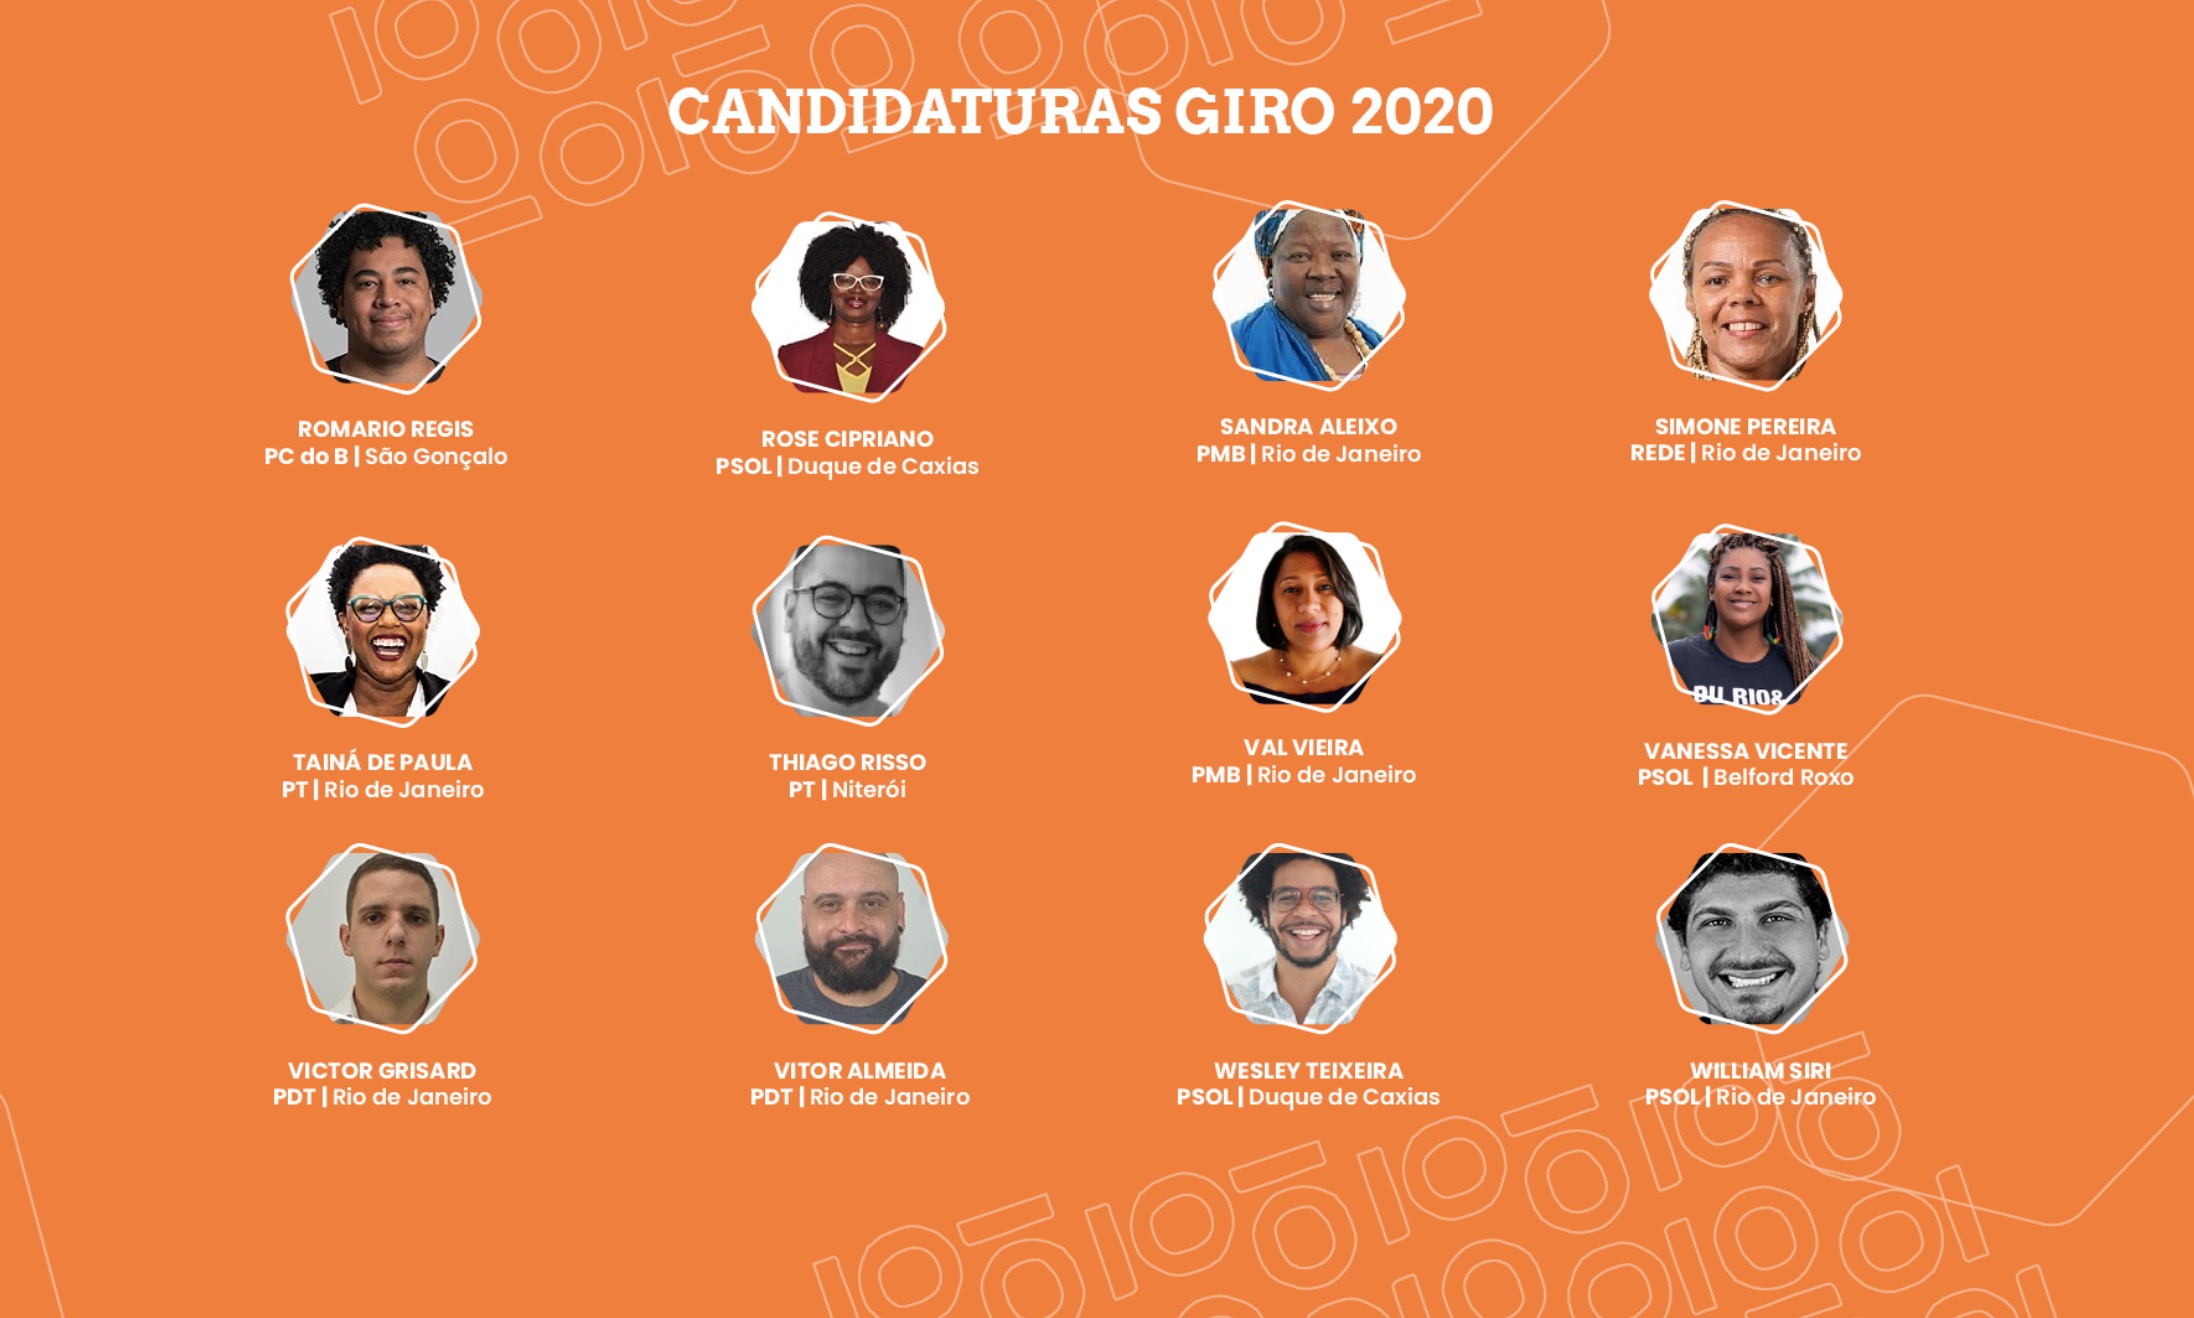 Profiles of some of the candidates supported by Giro 2020. Photo: Casa Fluminense